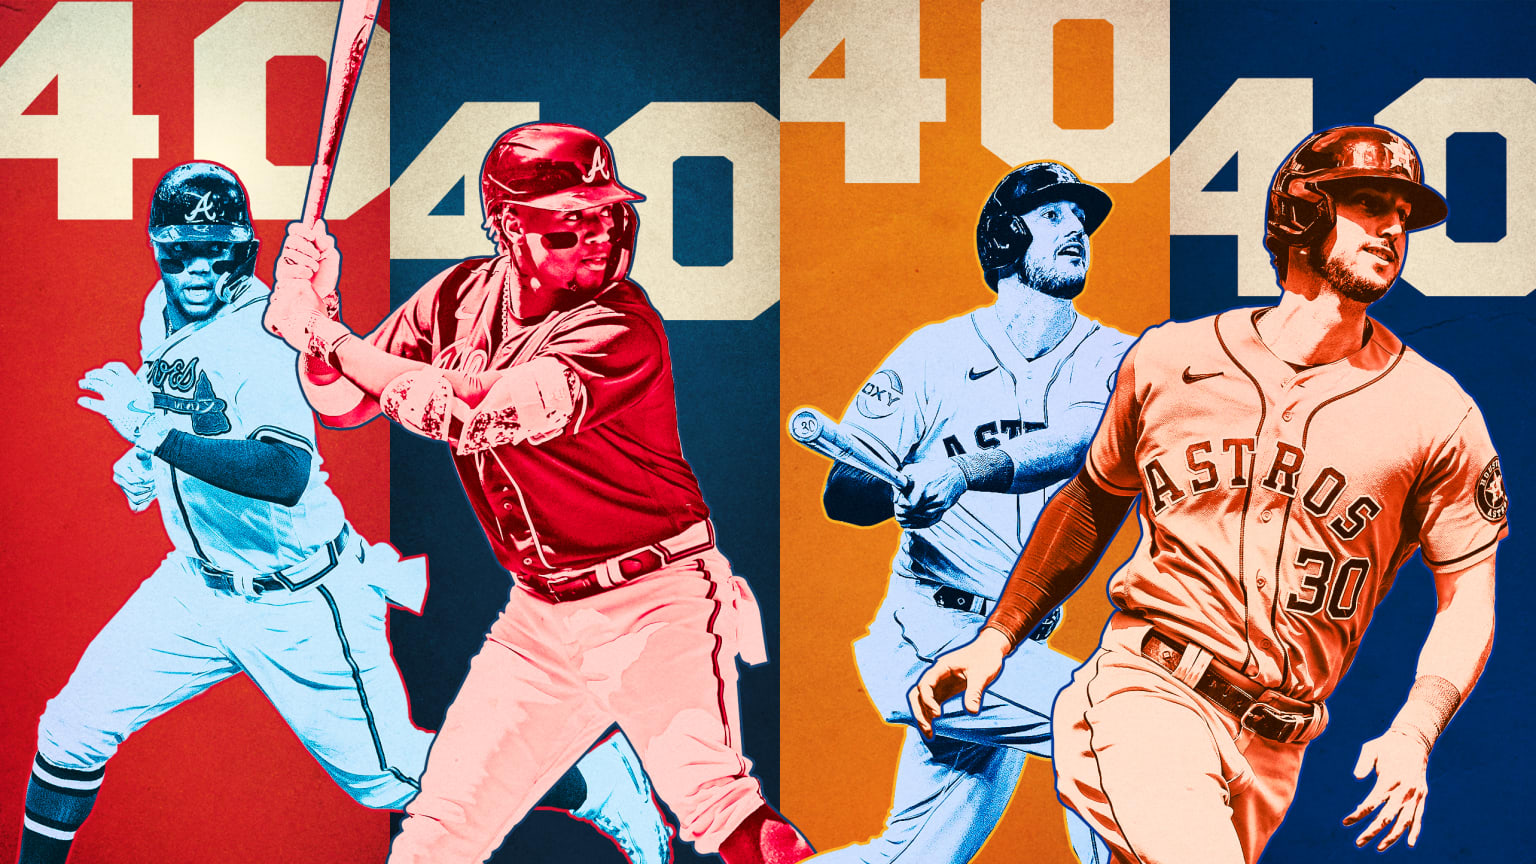 A graphic with images of Ronald Acuña Jr. and Kyle Tucker shown both running and hitting in front of the number 40